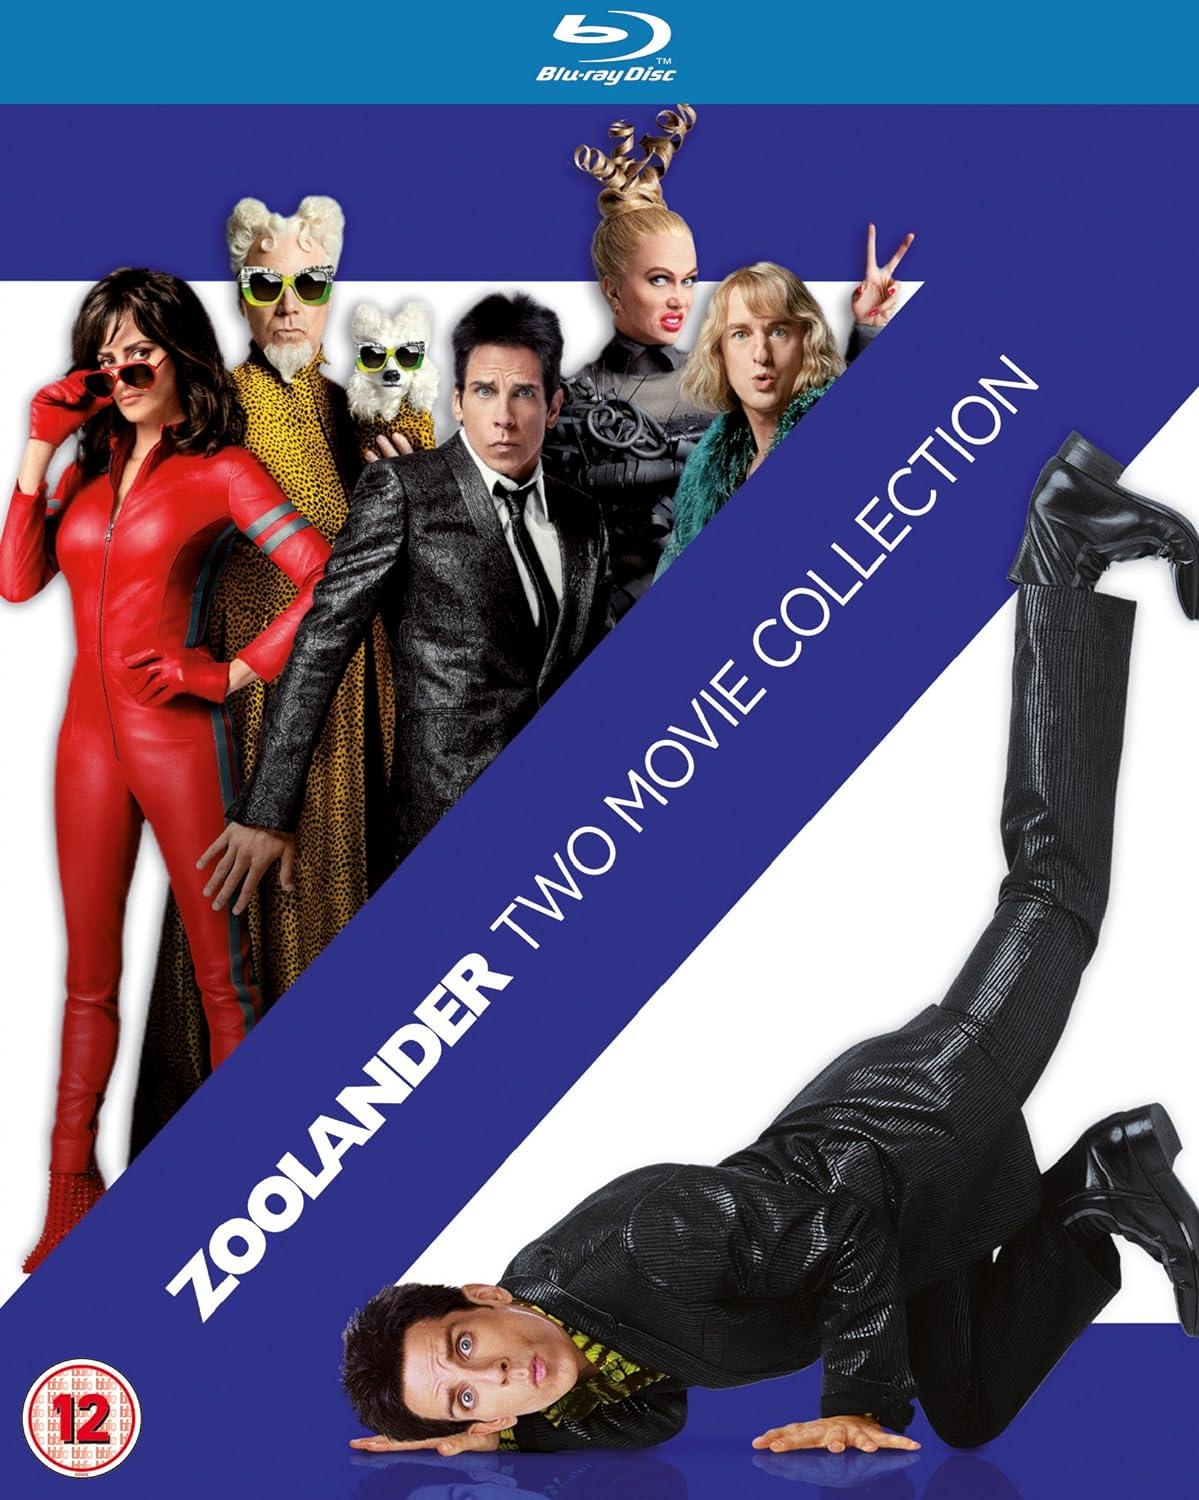 BLU-RAY TWO MOVIE COLLECTION - ZOOLANDER - Magic Dreams Store